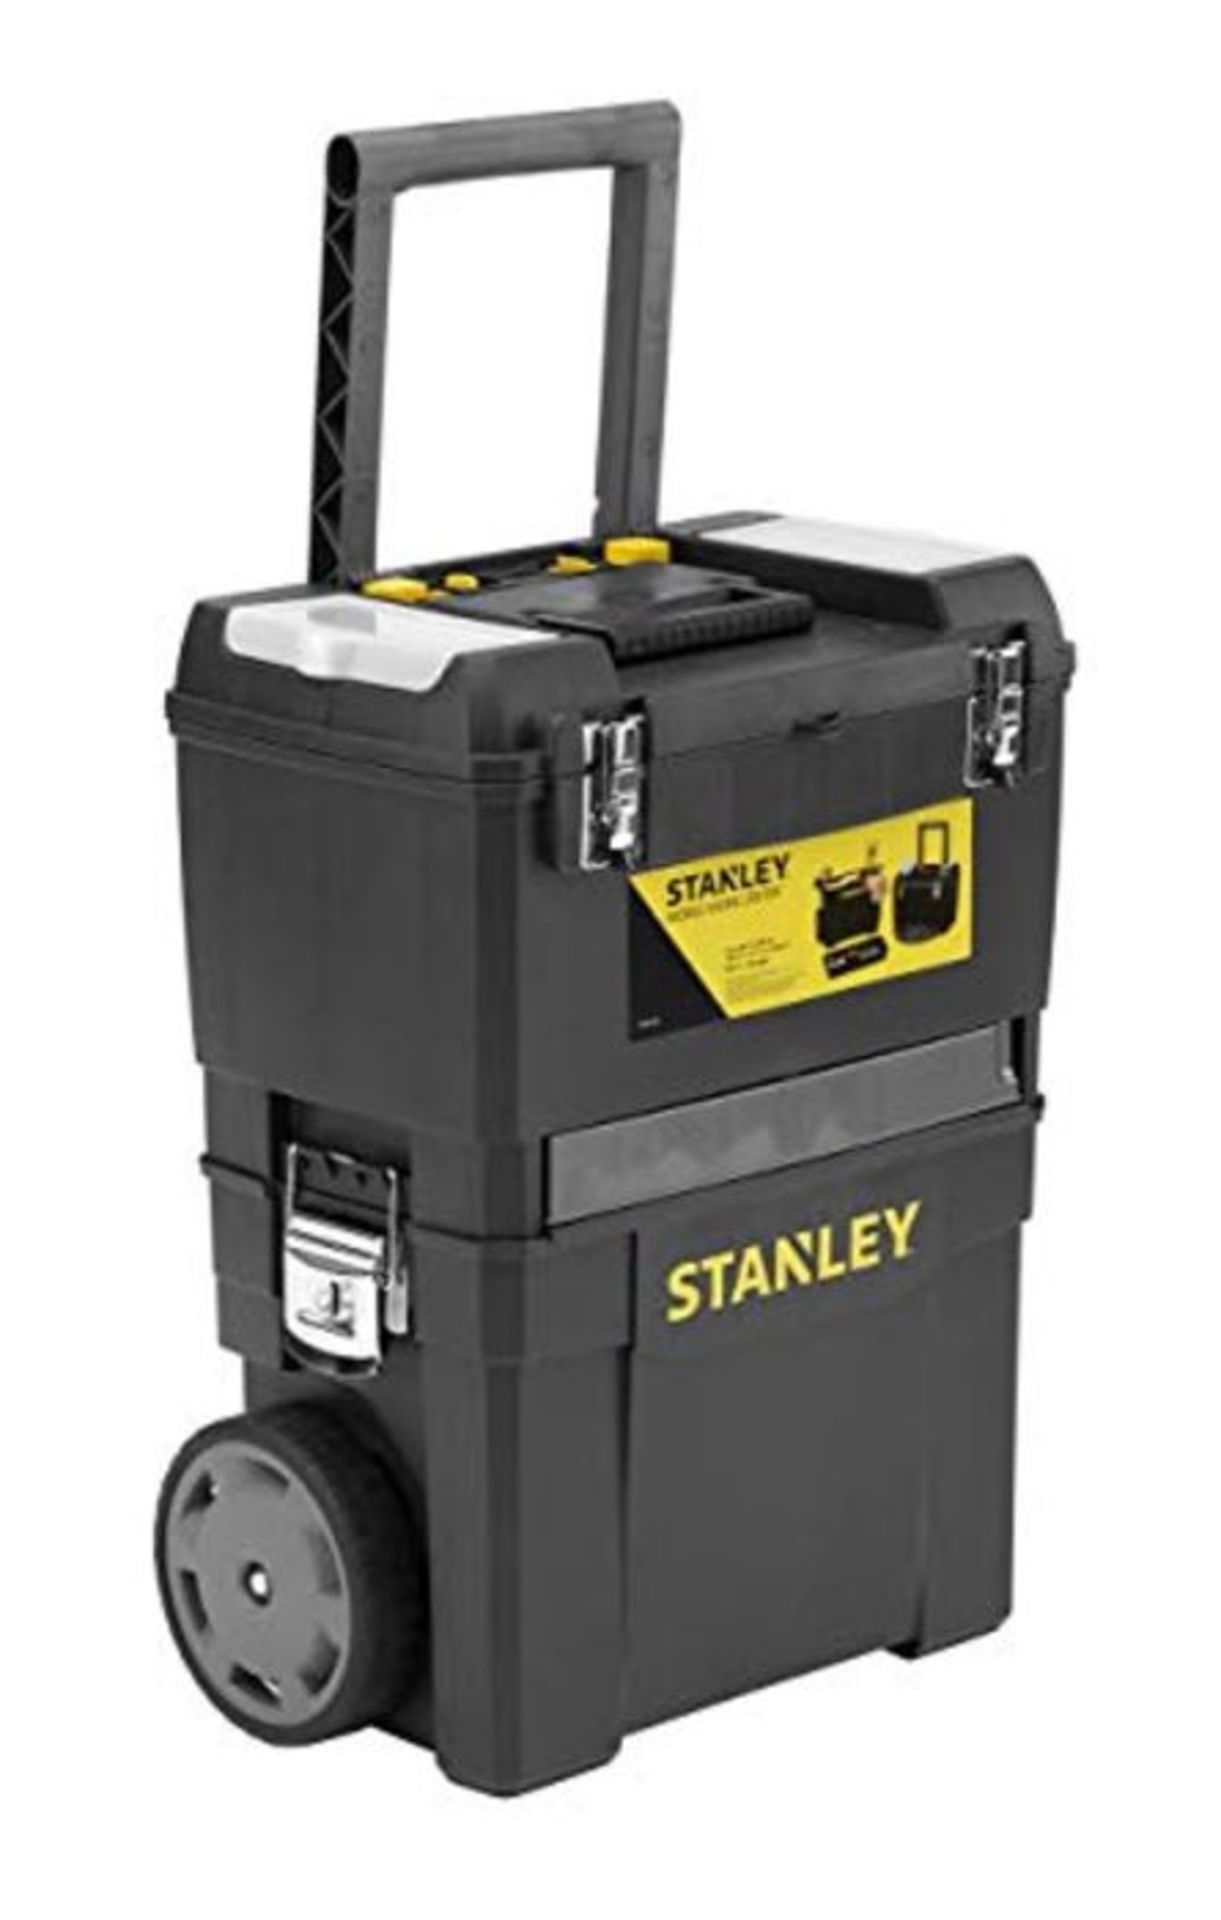 STANLEY Mobile Work Centre Toolbox, 2 Tier Stackable Units, 1-93-968